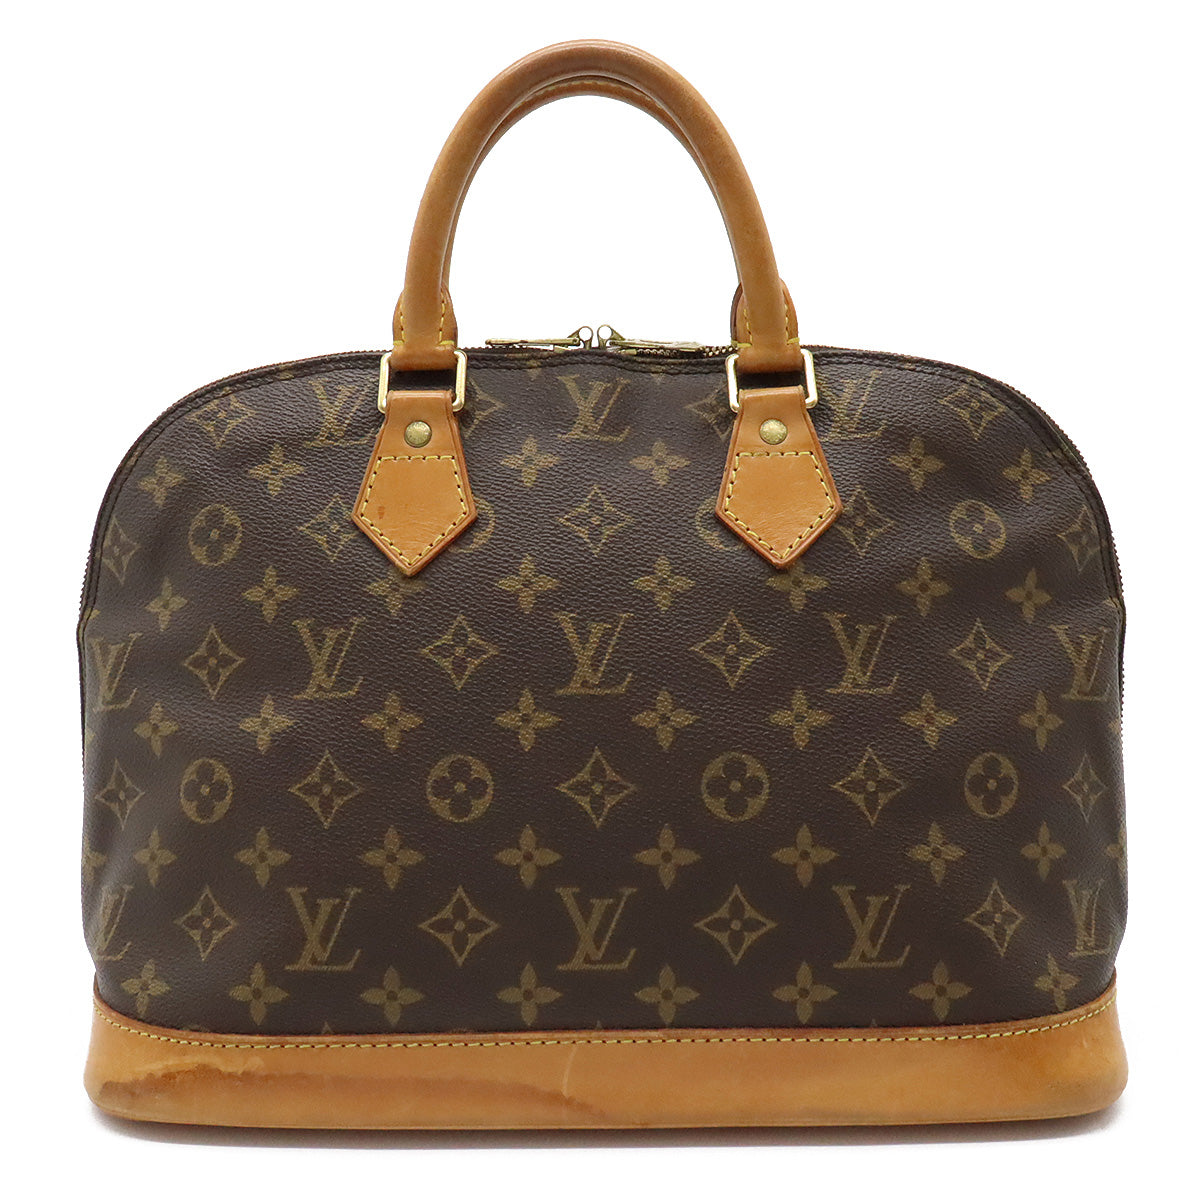 Louis Vuitton's Famous Monogram Over the Years